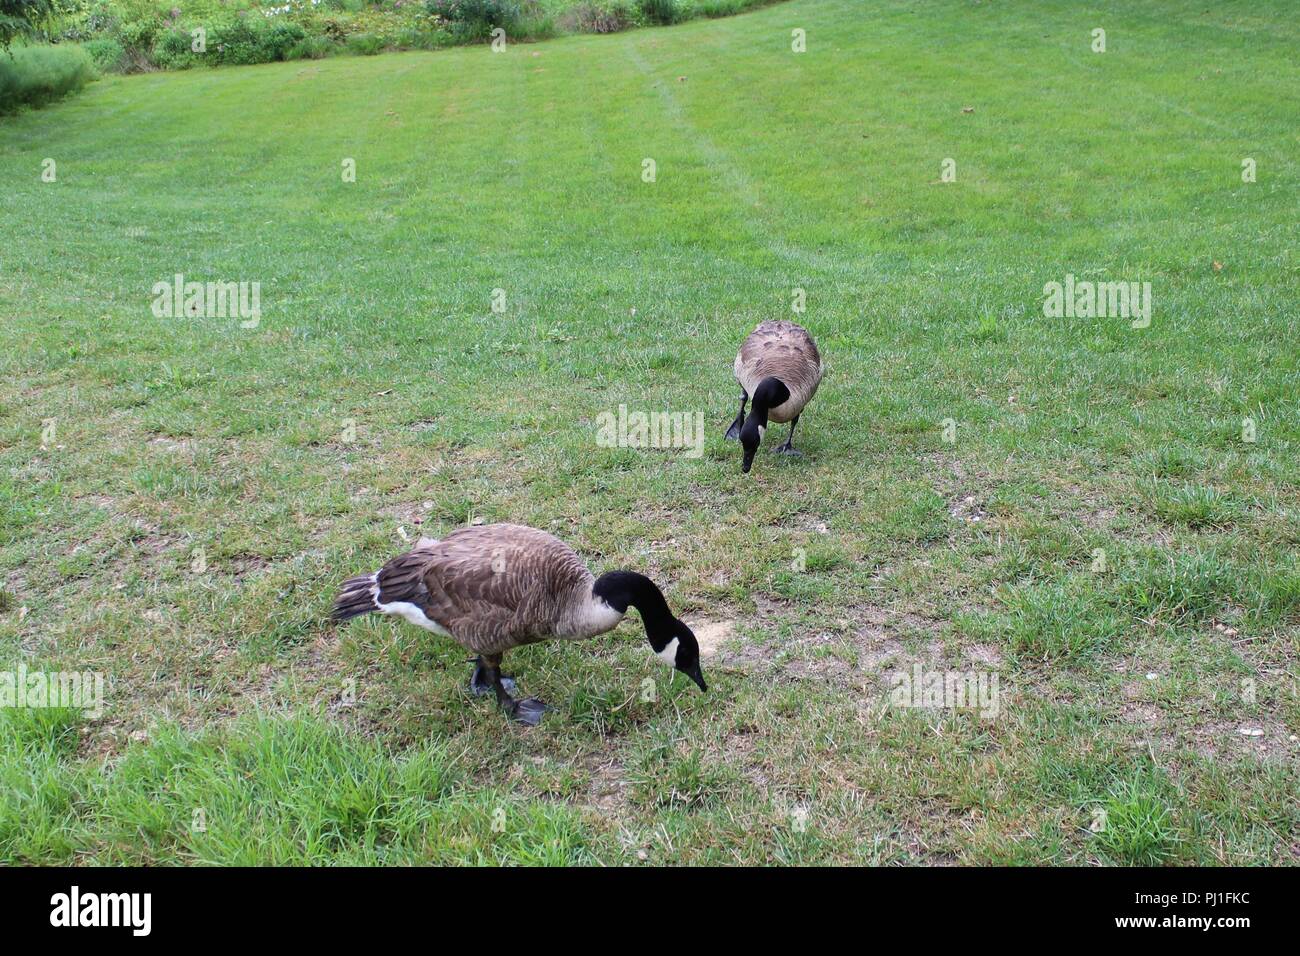 Two Geese In The Grass Stock Photo